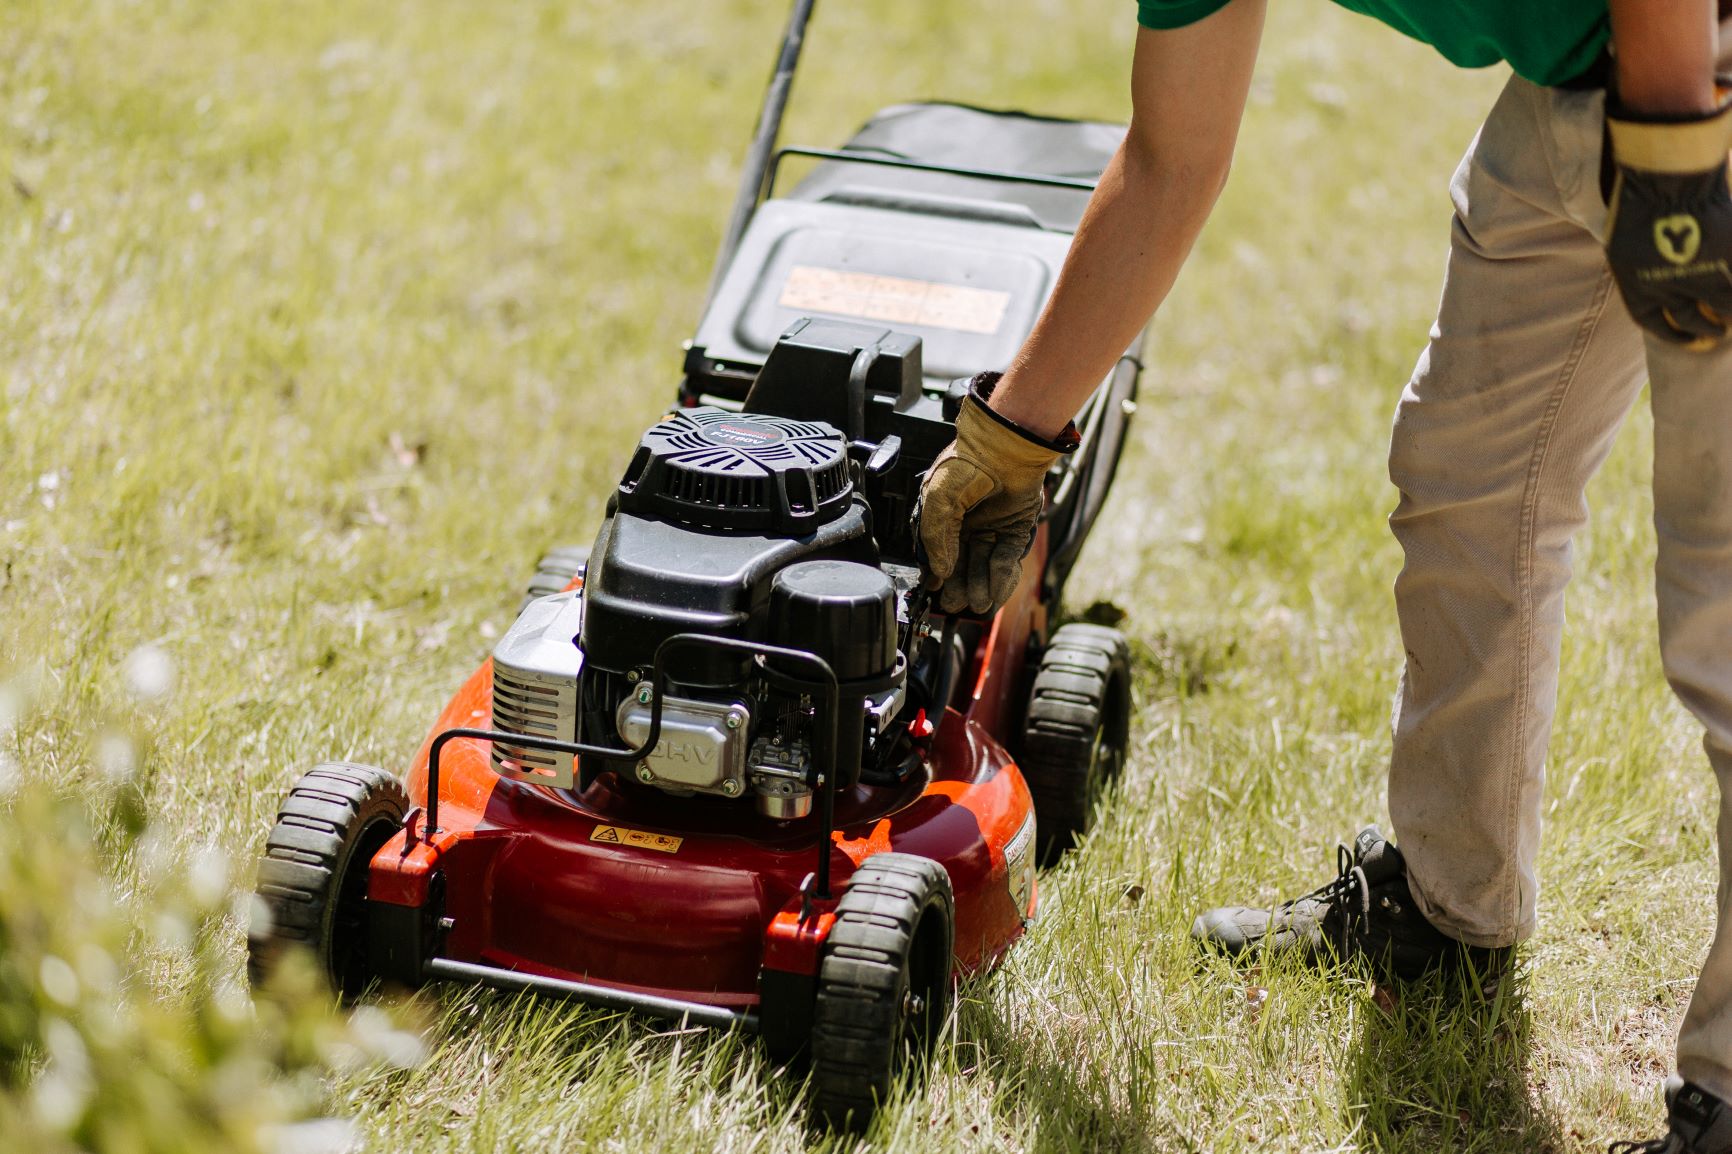 Blog: The One Costly Mistake You’re Likely To Make When Storing Your Lawn Mower Over Winter